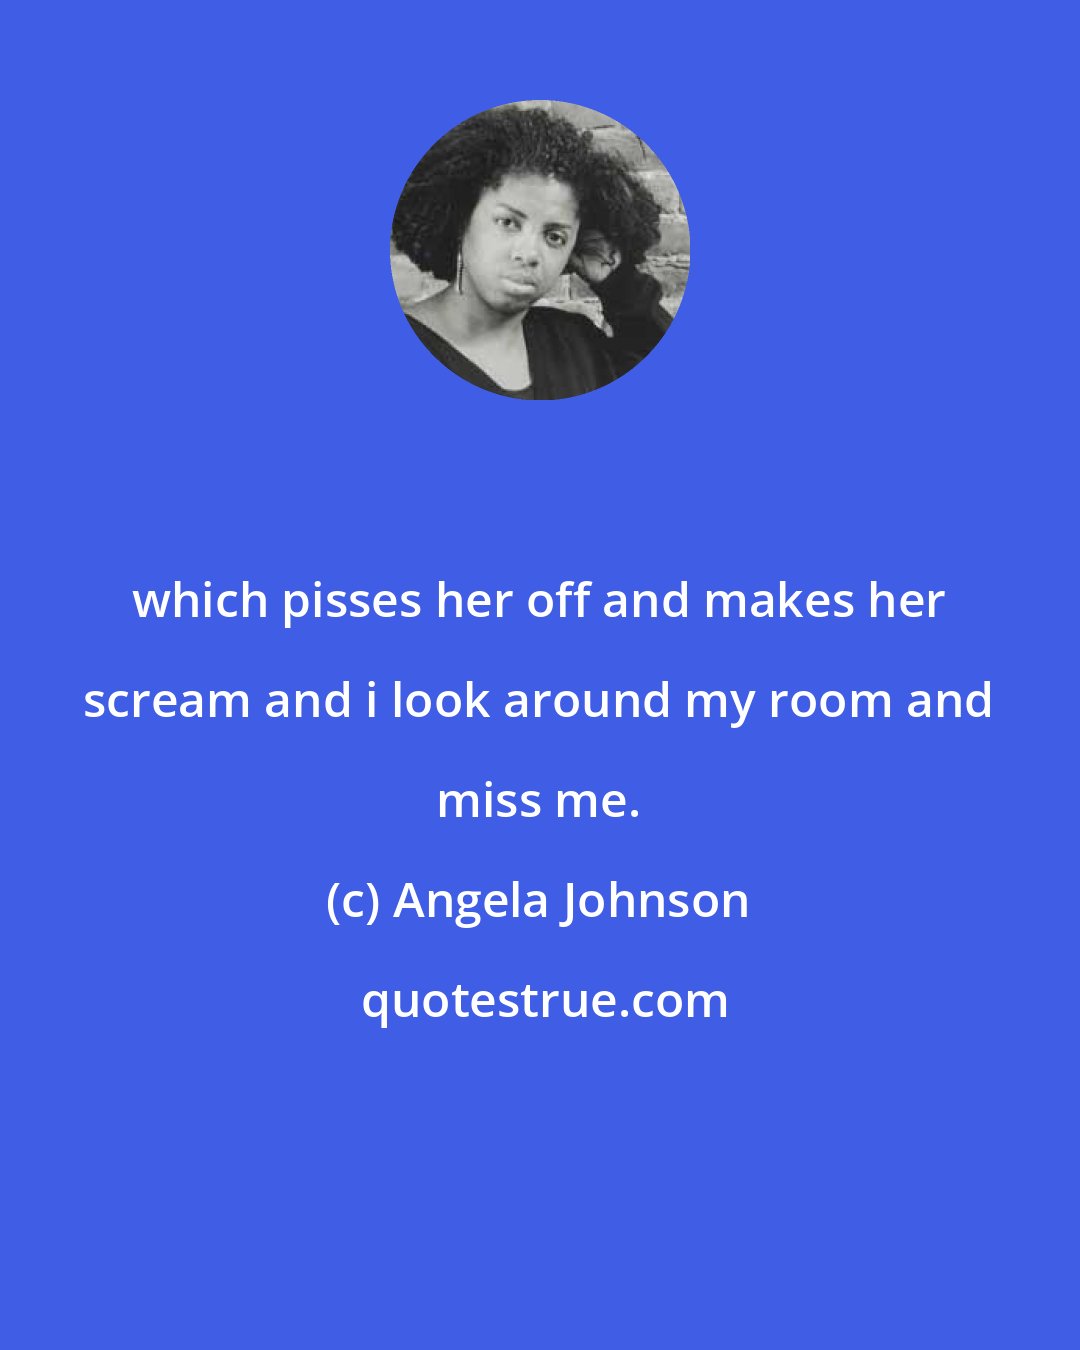 Angela Johnson: which pisses her off and makes her scream and i look around my room and miss me.